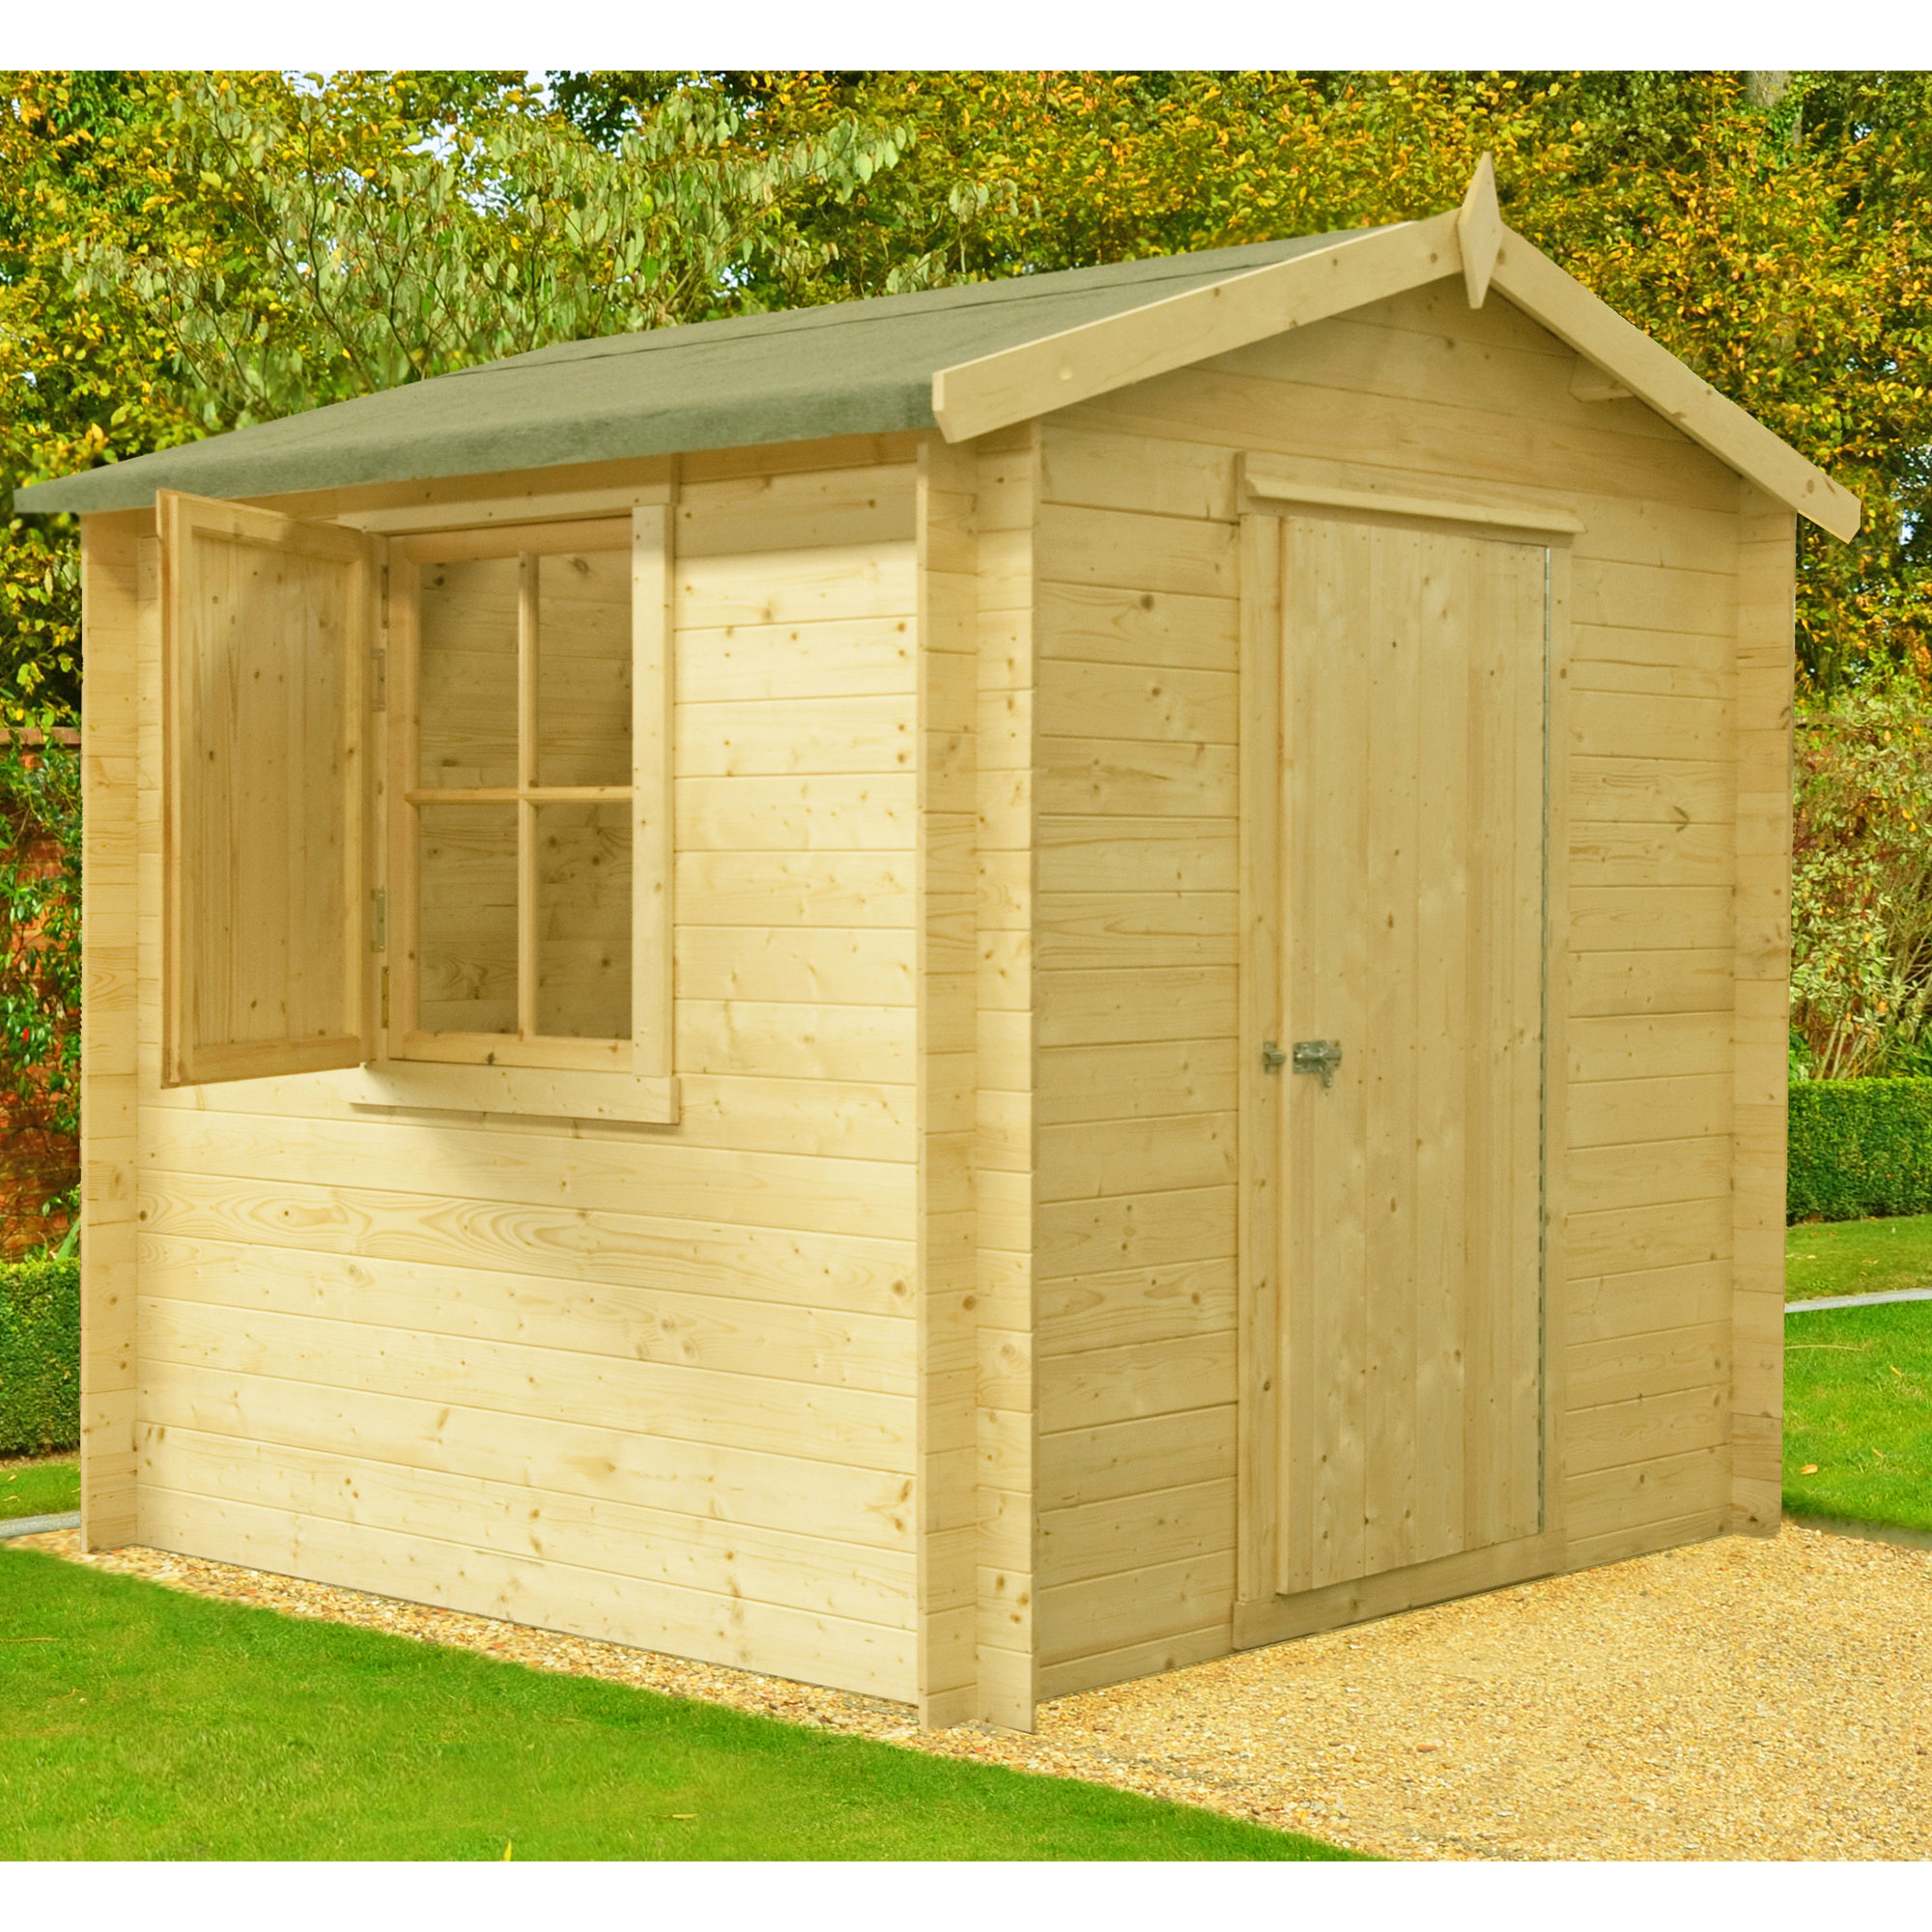 Shire Camelot 2.7m x 2.7m Log Cabin Shed (19mm)